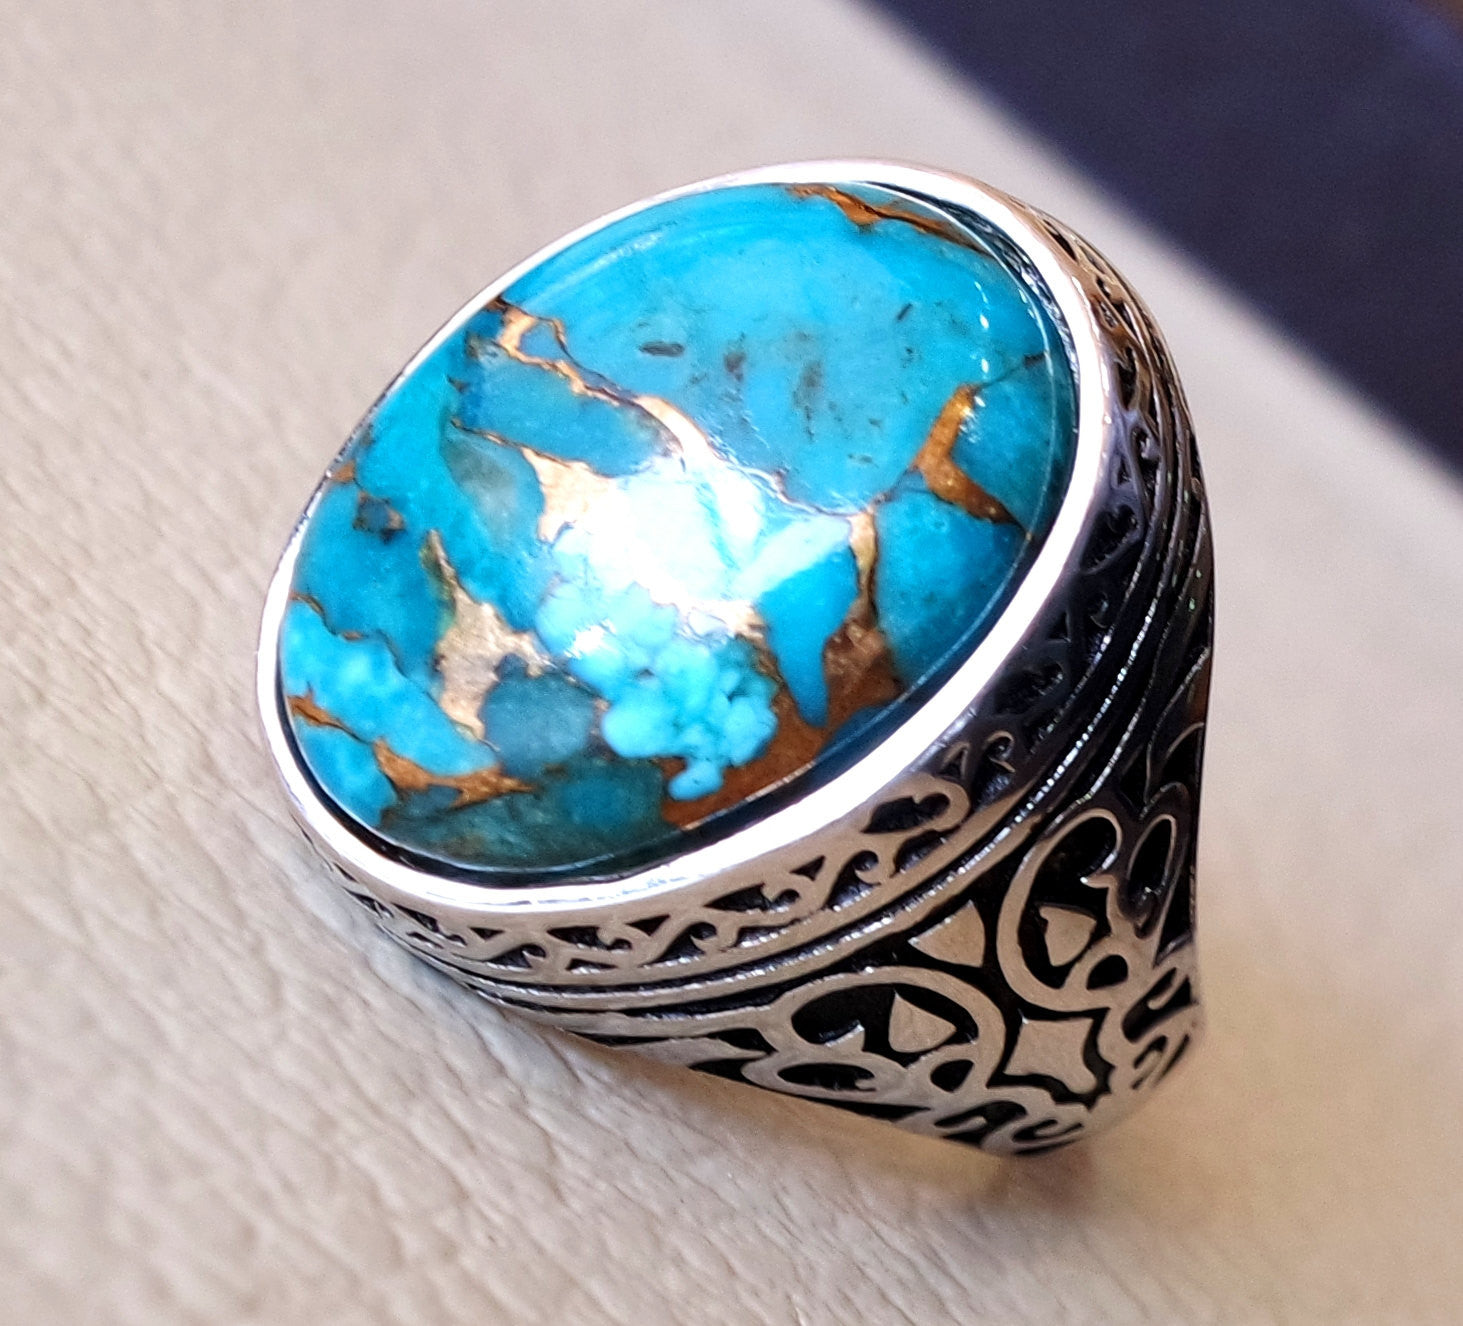 man ring copper turquoise natural stone sterling silver 925 oval cabochon semi precious gem ottoman arabic style all sizes jewelry